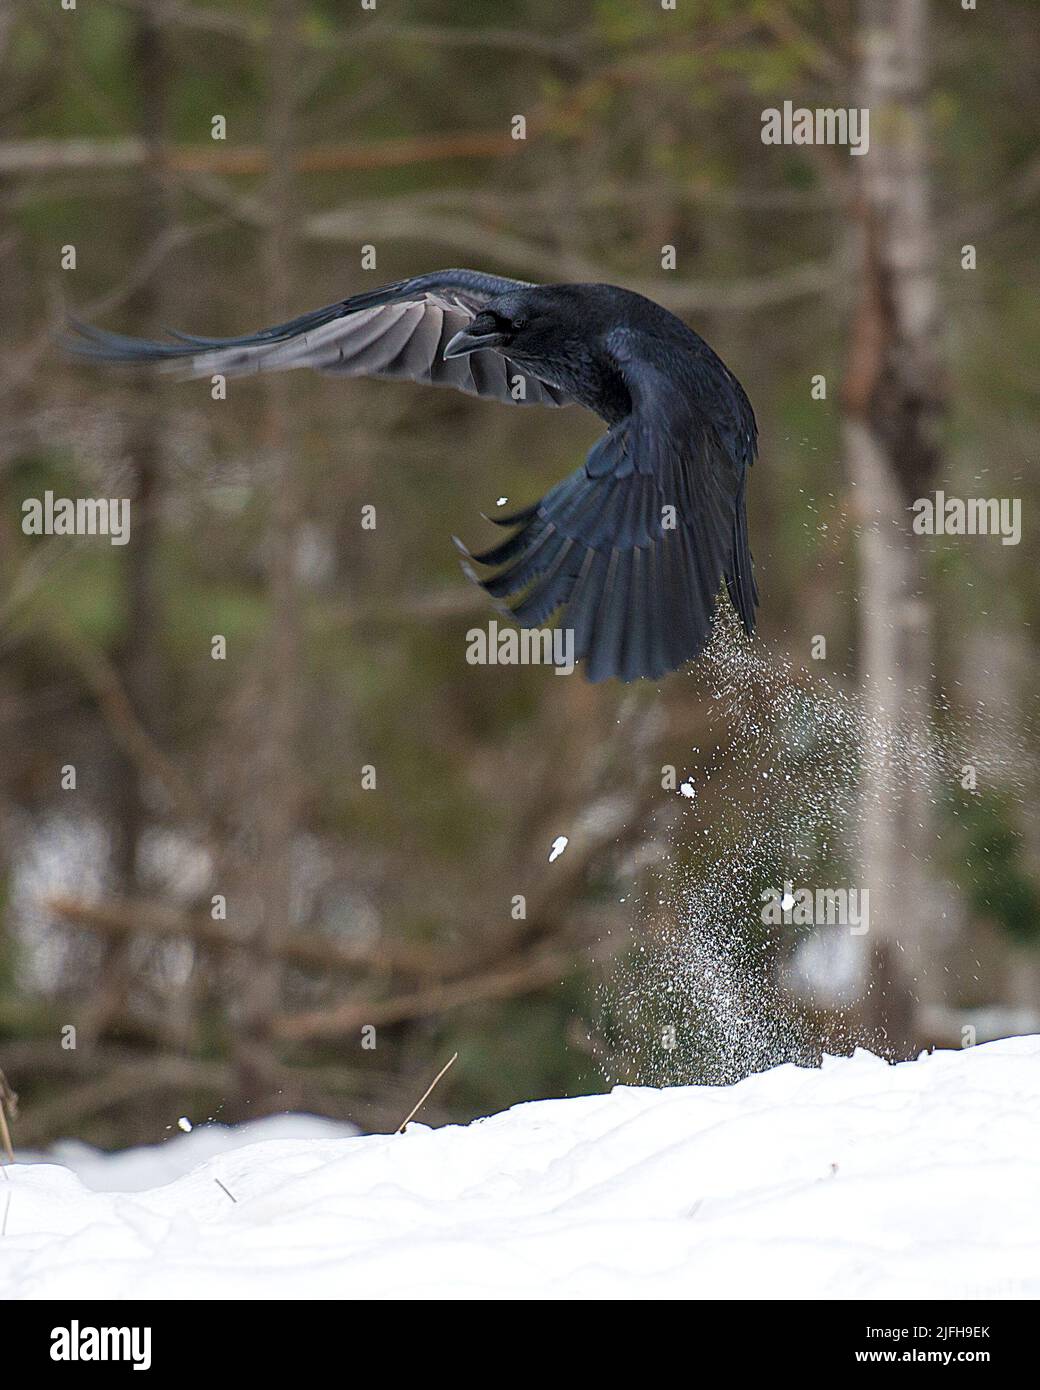 Raven bird flying in the winter season with a blur background in its environment and habitat displaying spread wings, black feather plumage. Crow. Stock Photo